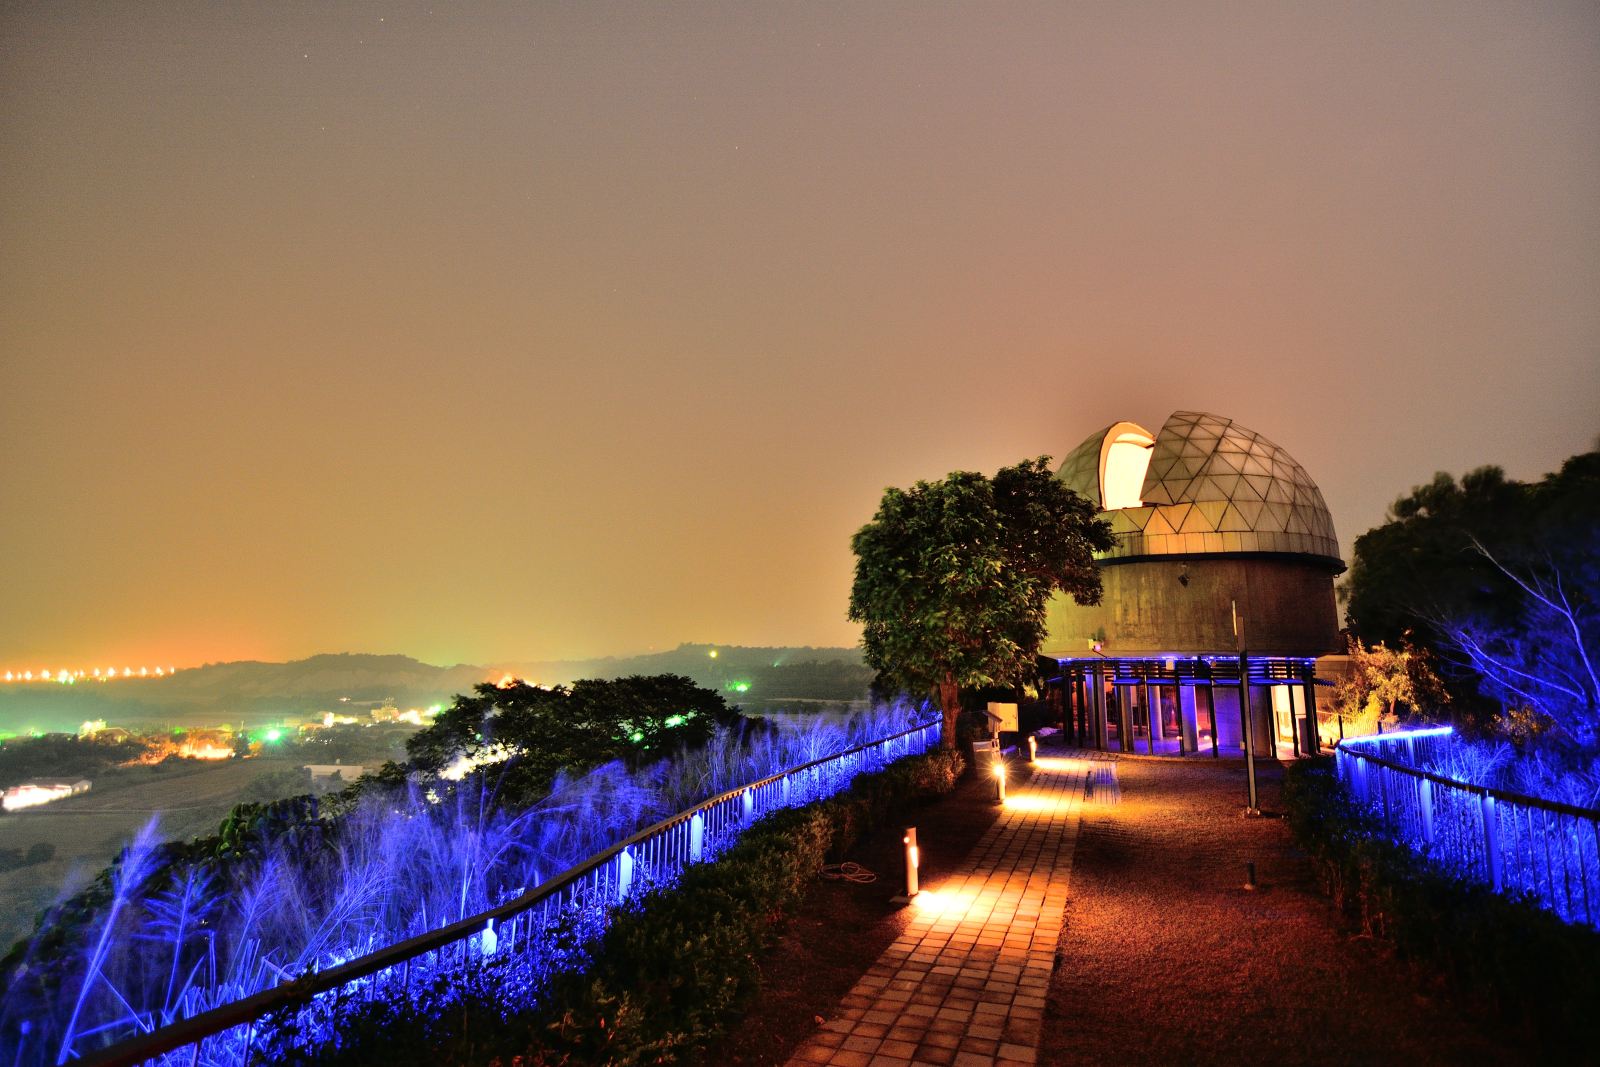 The Observatory night view